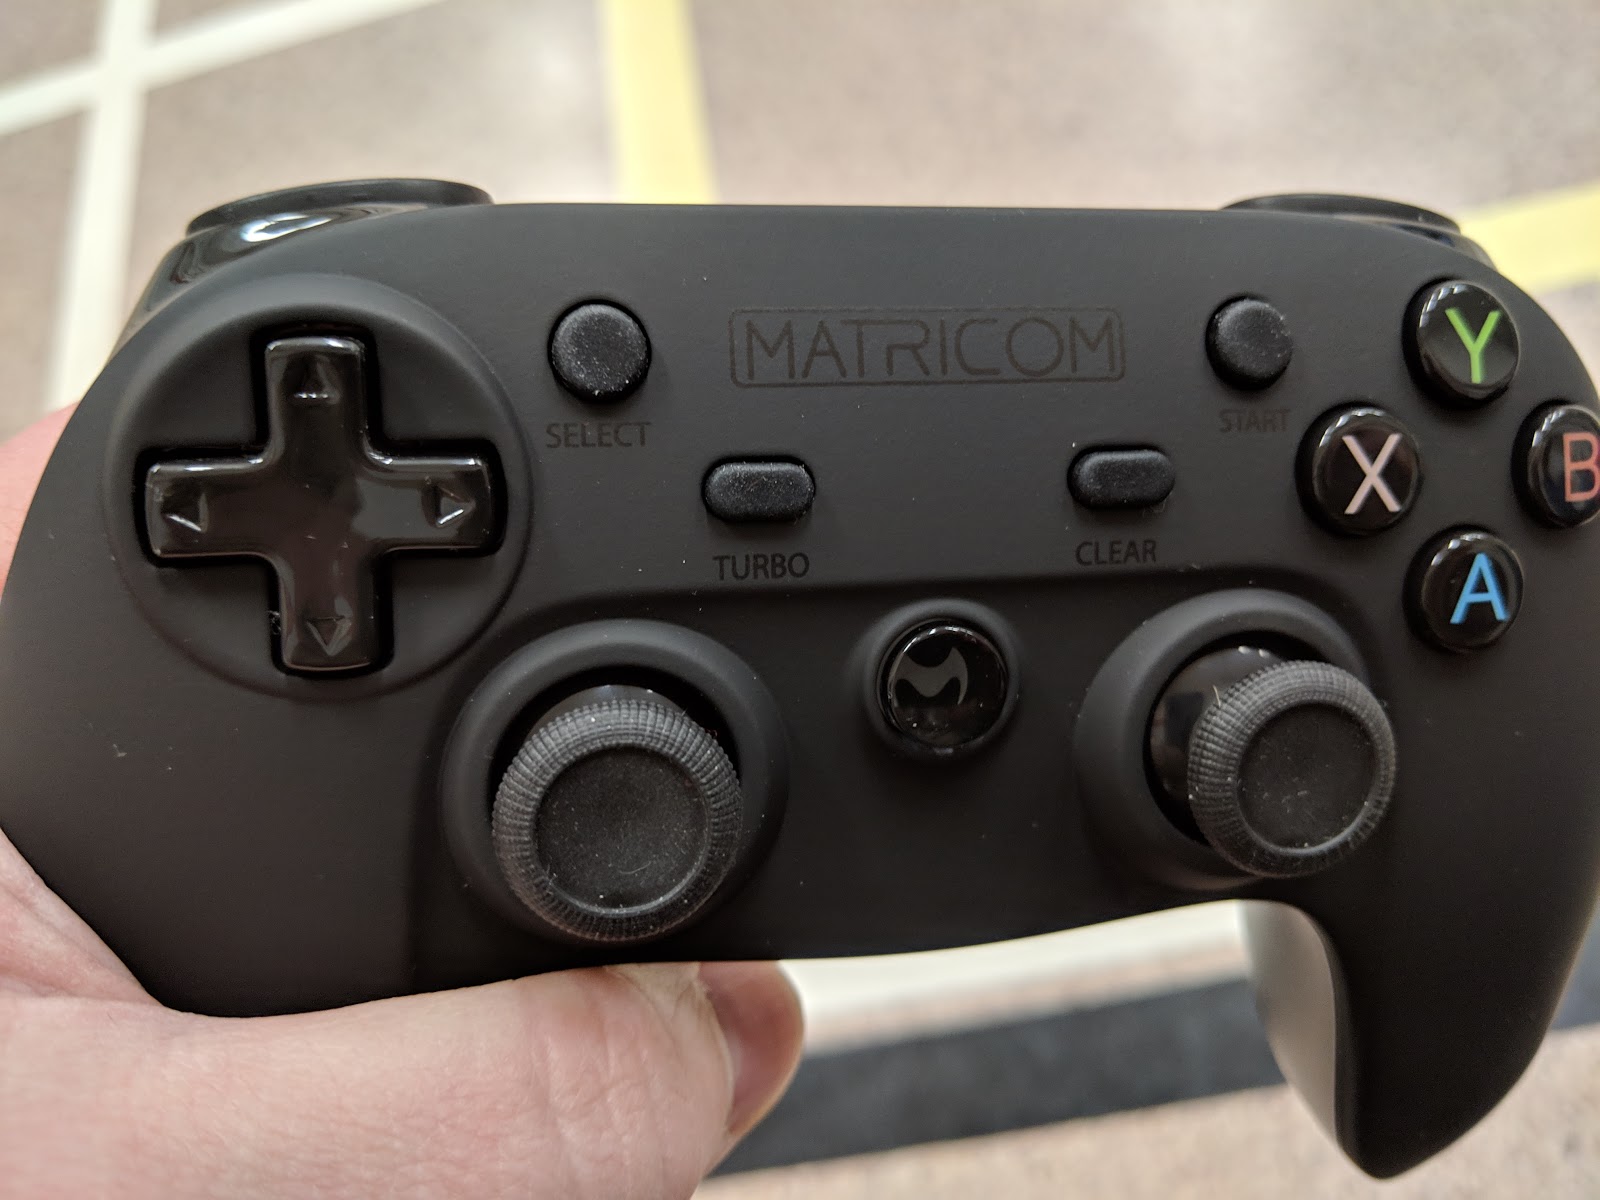 how-to-pair-matricom-game-controller-with-amazon-tv